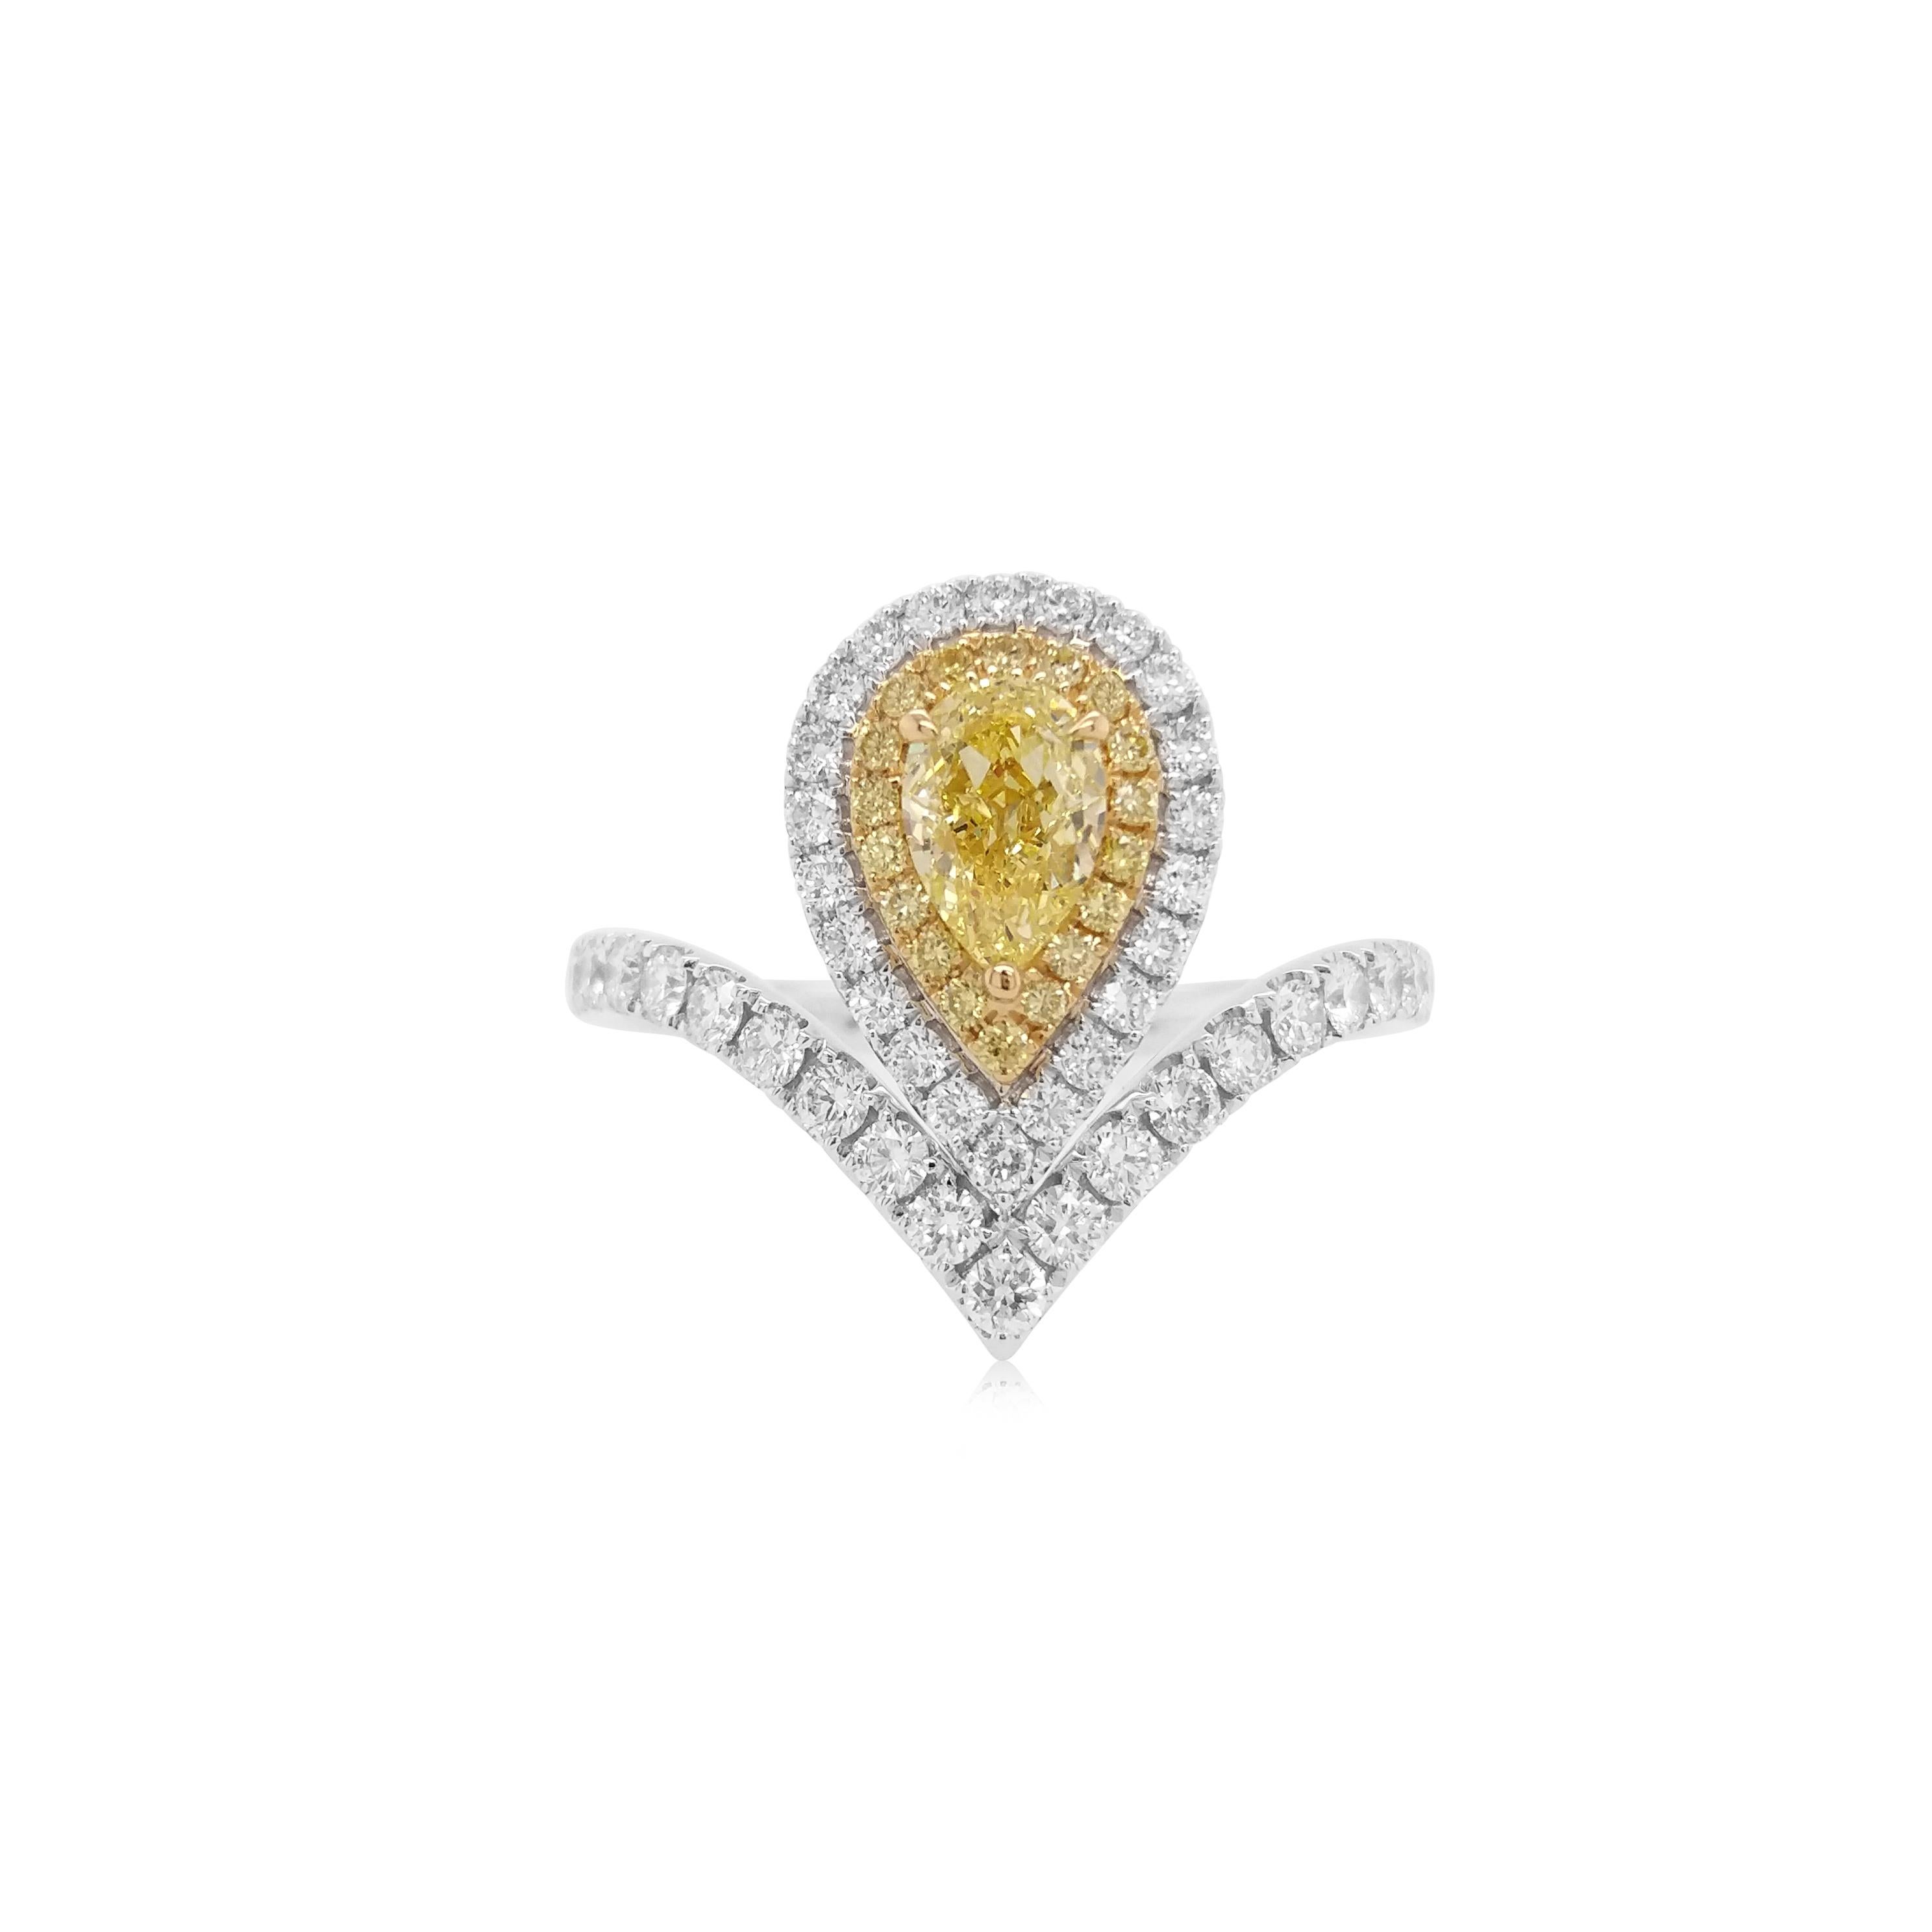 This one-of-a-kind beautiful Natural Yellow Diamond ring is a trendsetter, carved in 18K Gold with a magnificent setting and look.

- Fancy Yellow Diamond (GIA:1457390706) - 0.54cts
- Yellow Diamonds - 0.105 cts
- White Diamonds - 0.52 cts.

HYT